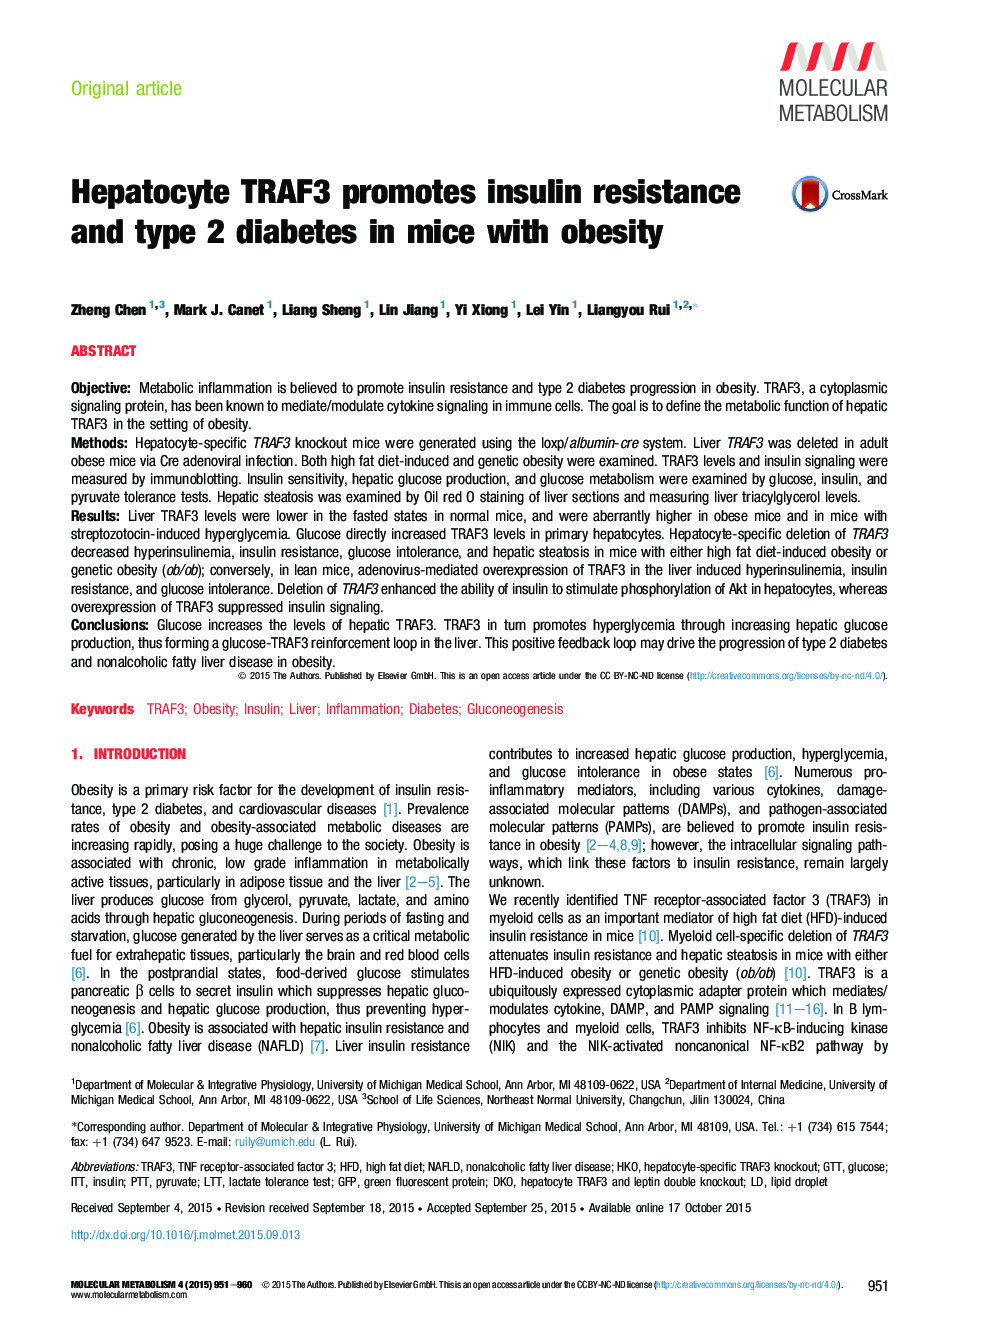 Hepatocyte TRAF3 promotes insulin resistance and type 2 diabetes in mice with obesity